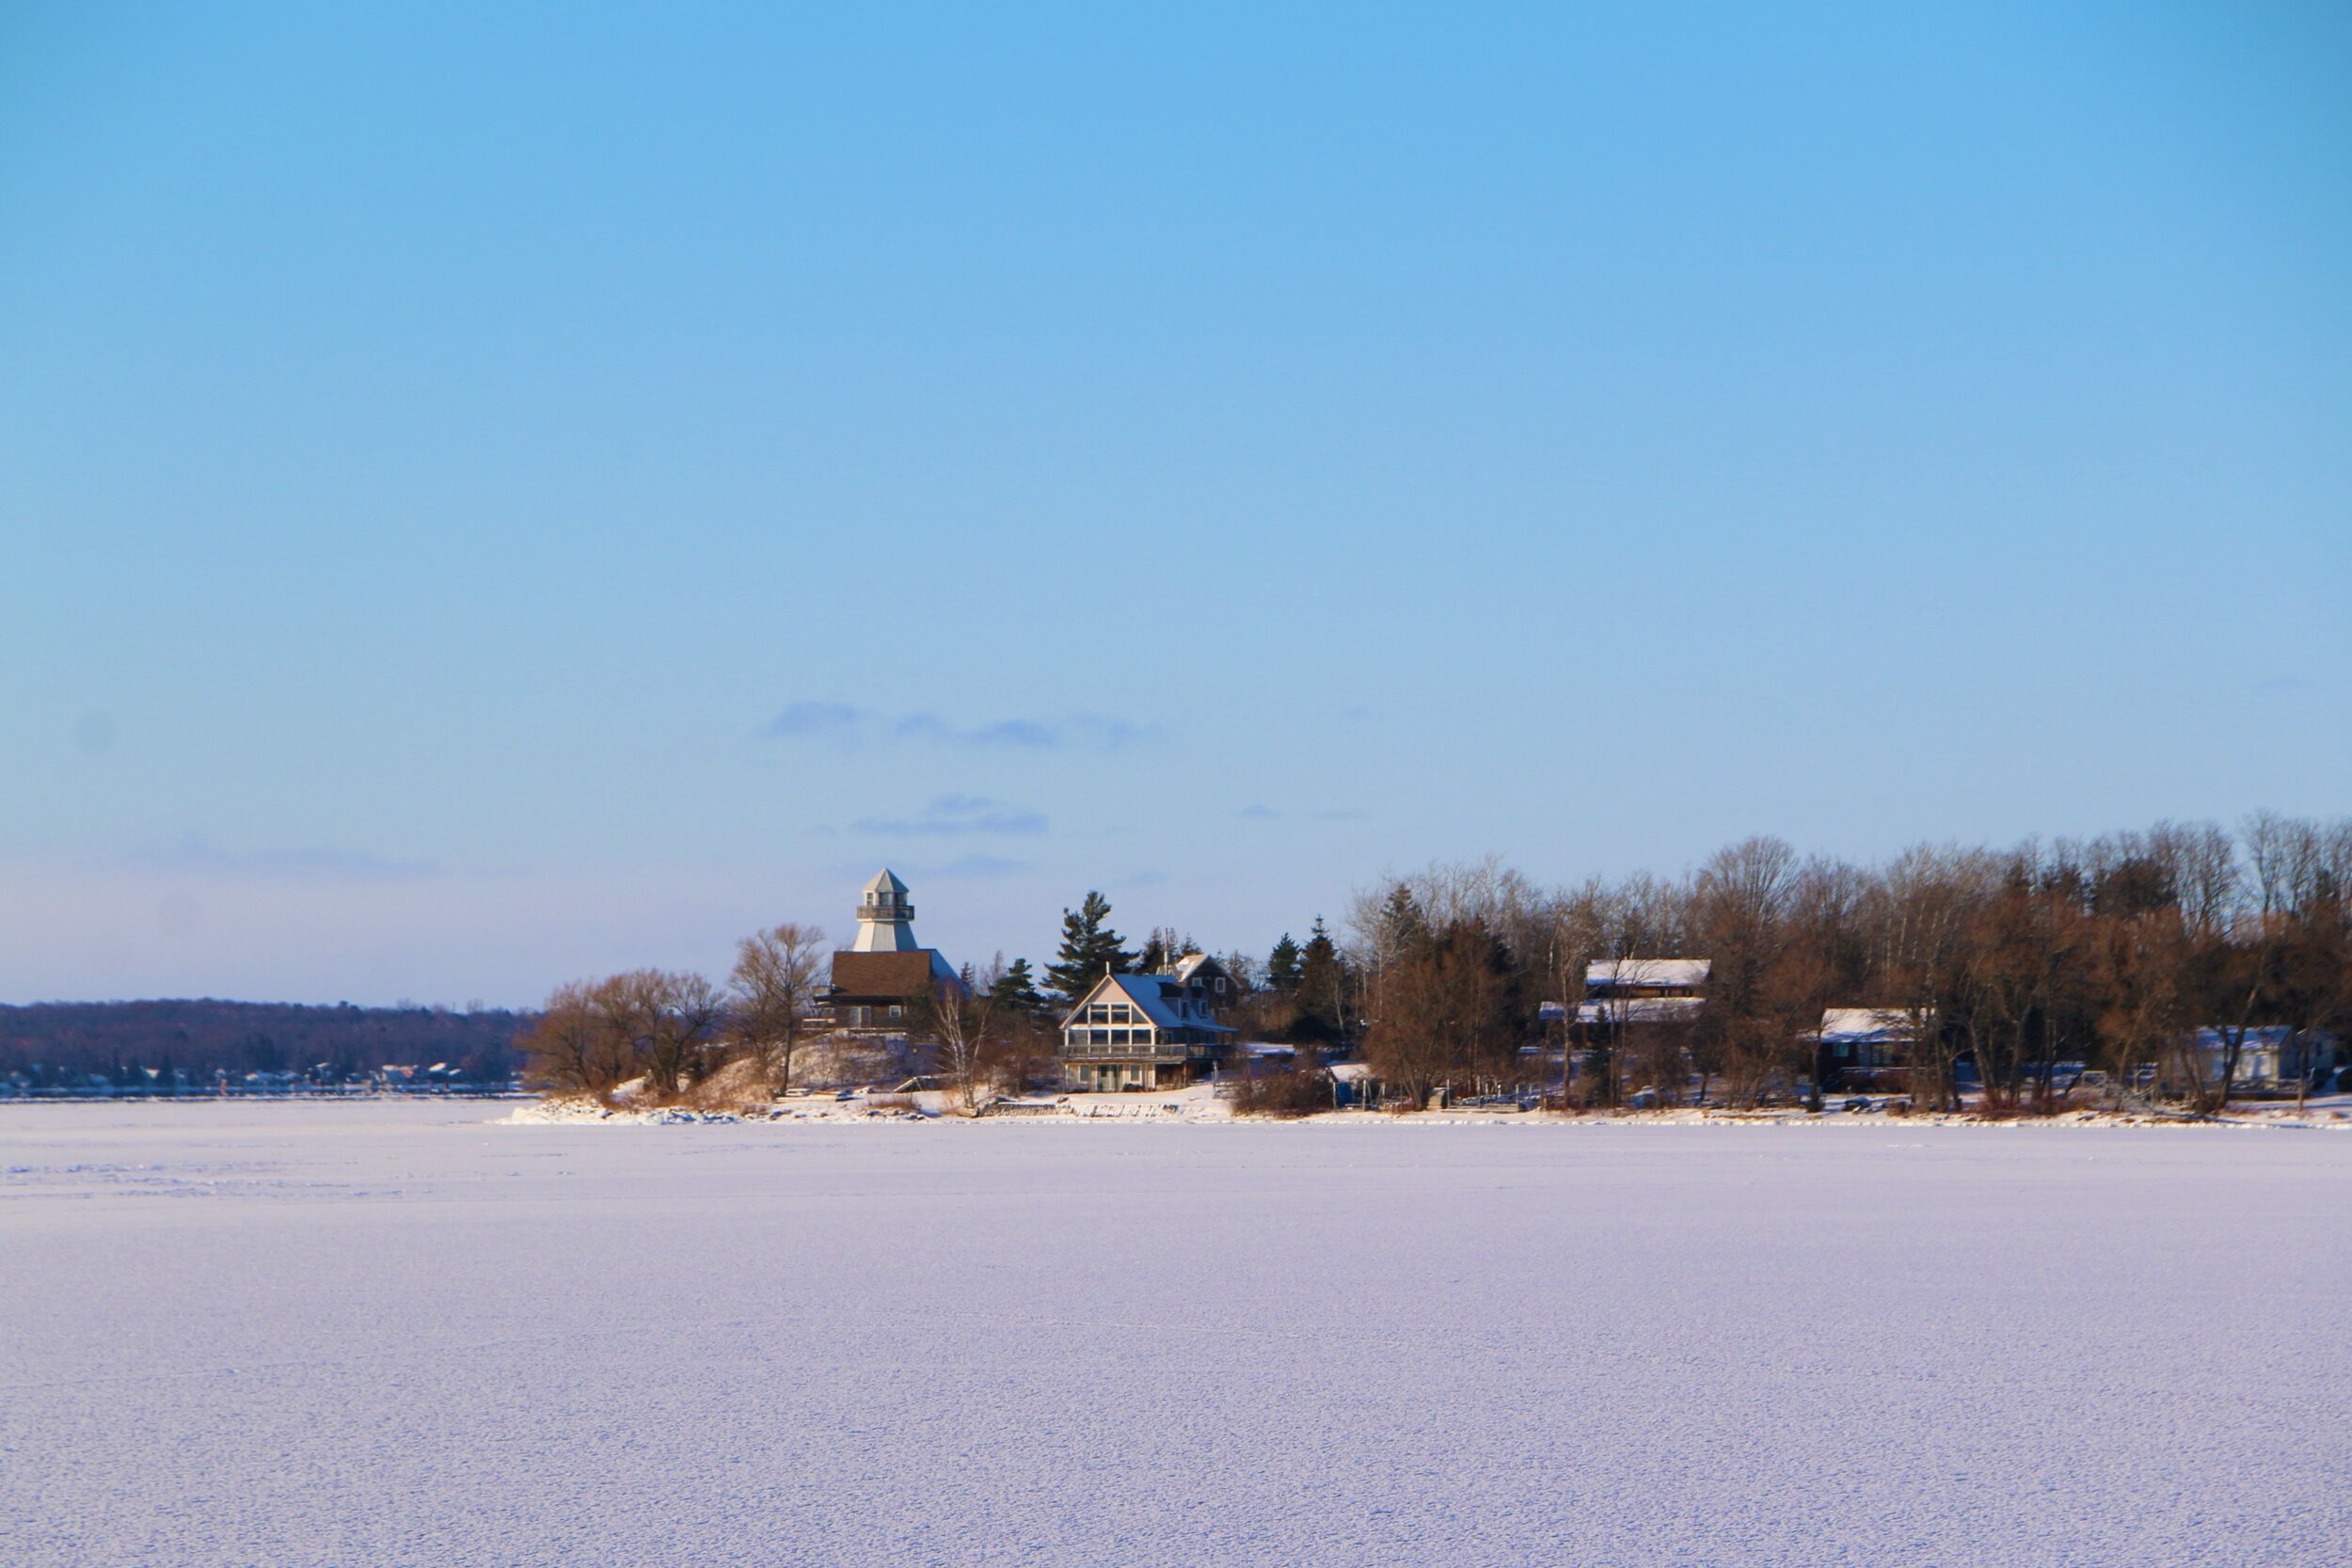 Snake Island from the frozen lake.